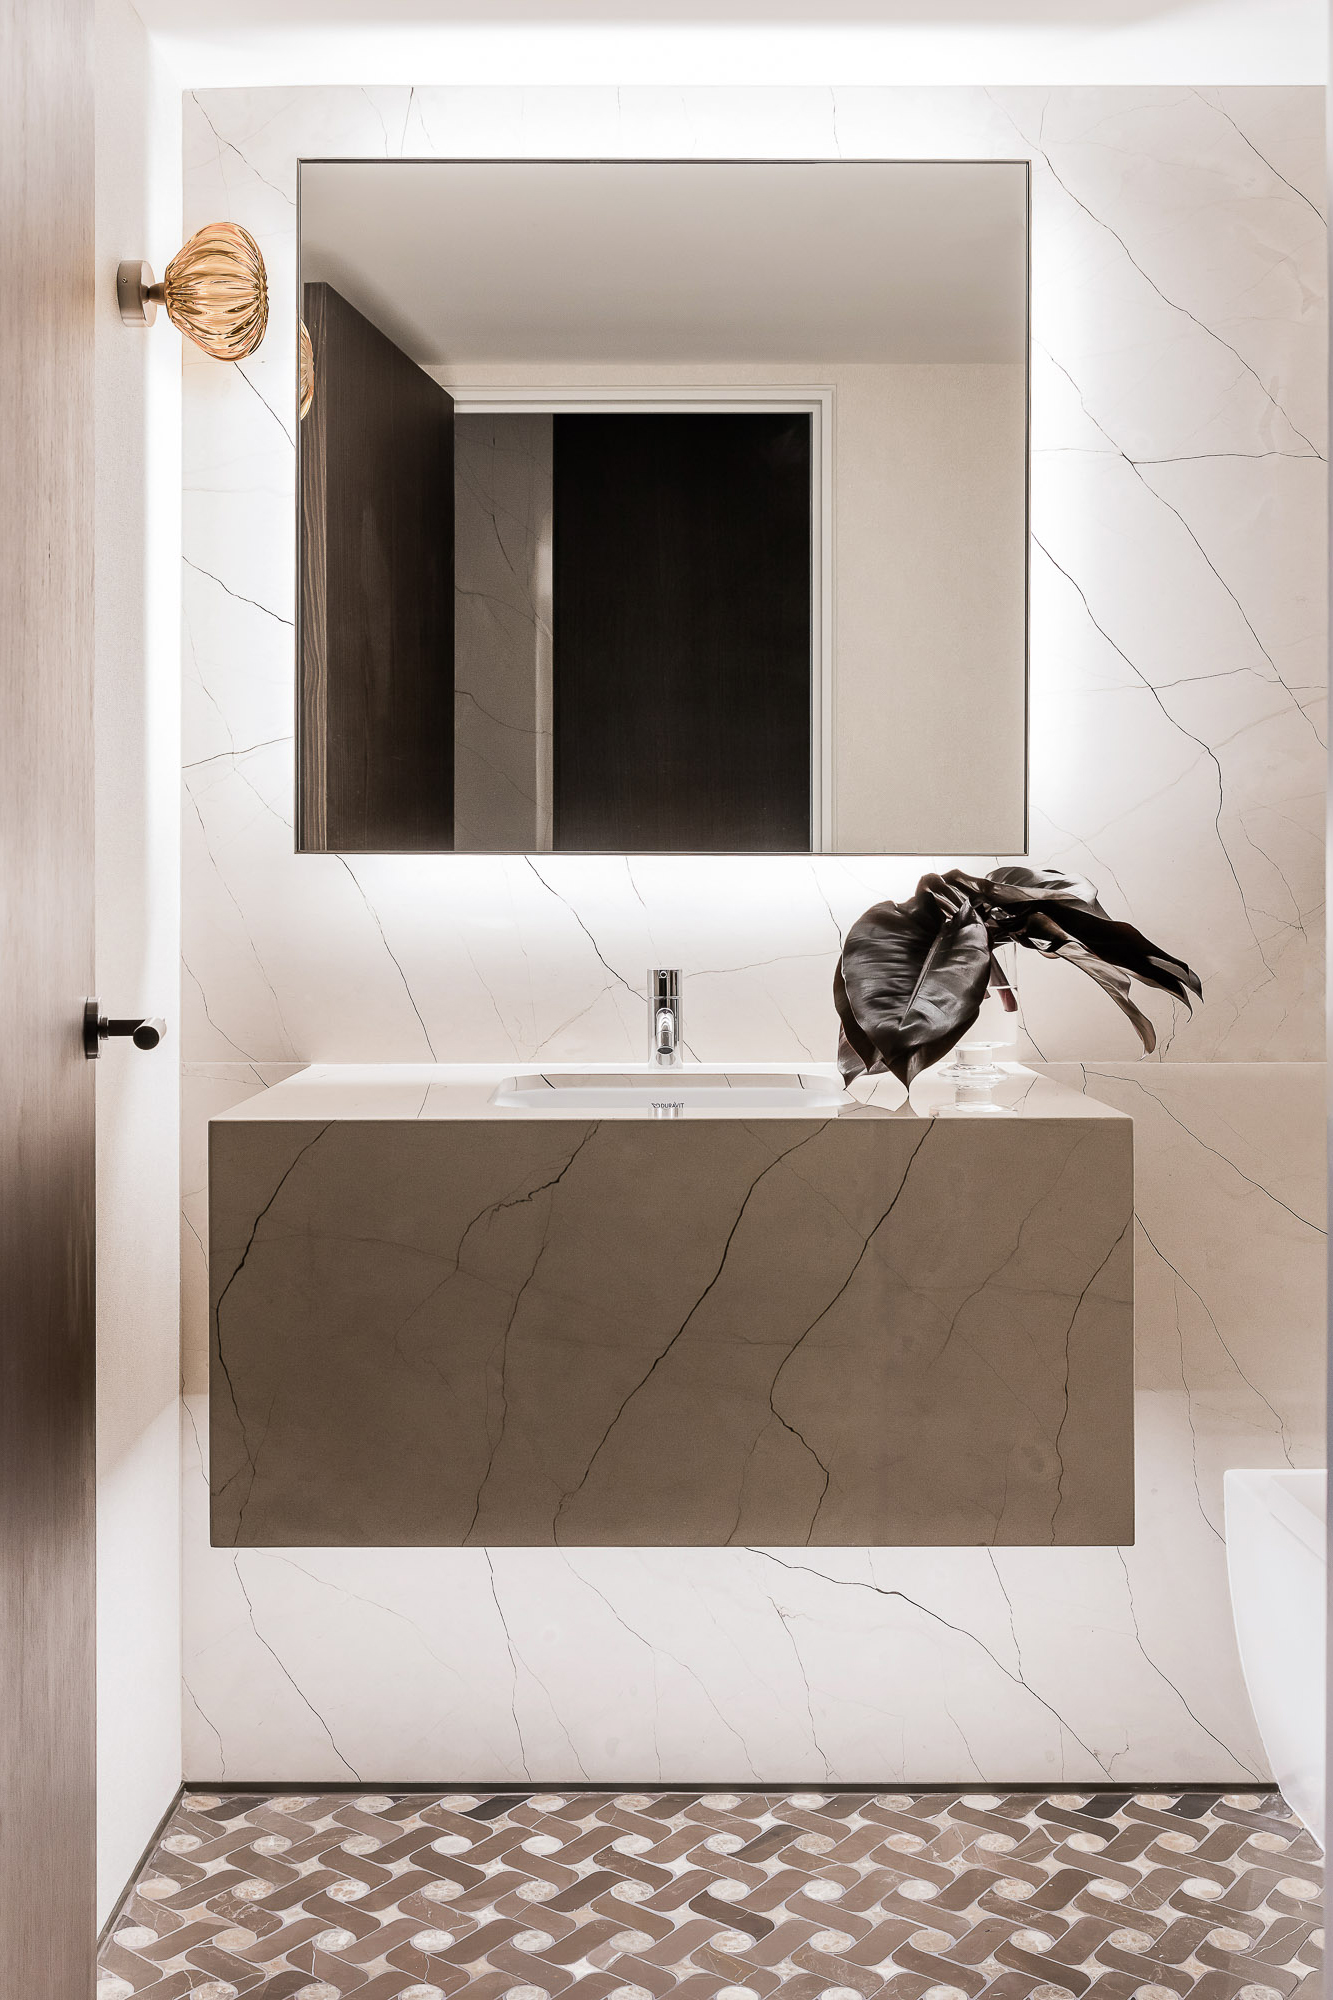 Powder room marble bathroom design with pattern tile floor and wall light by Sydney interior designers, Brendan Wong Design